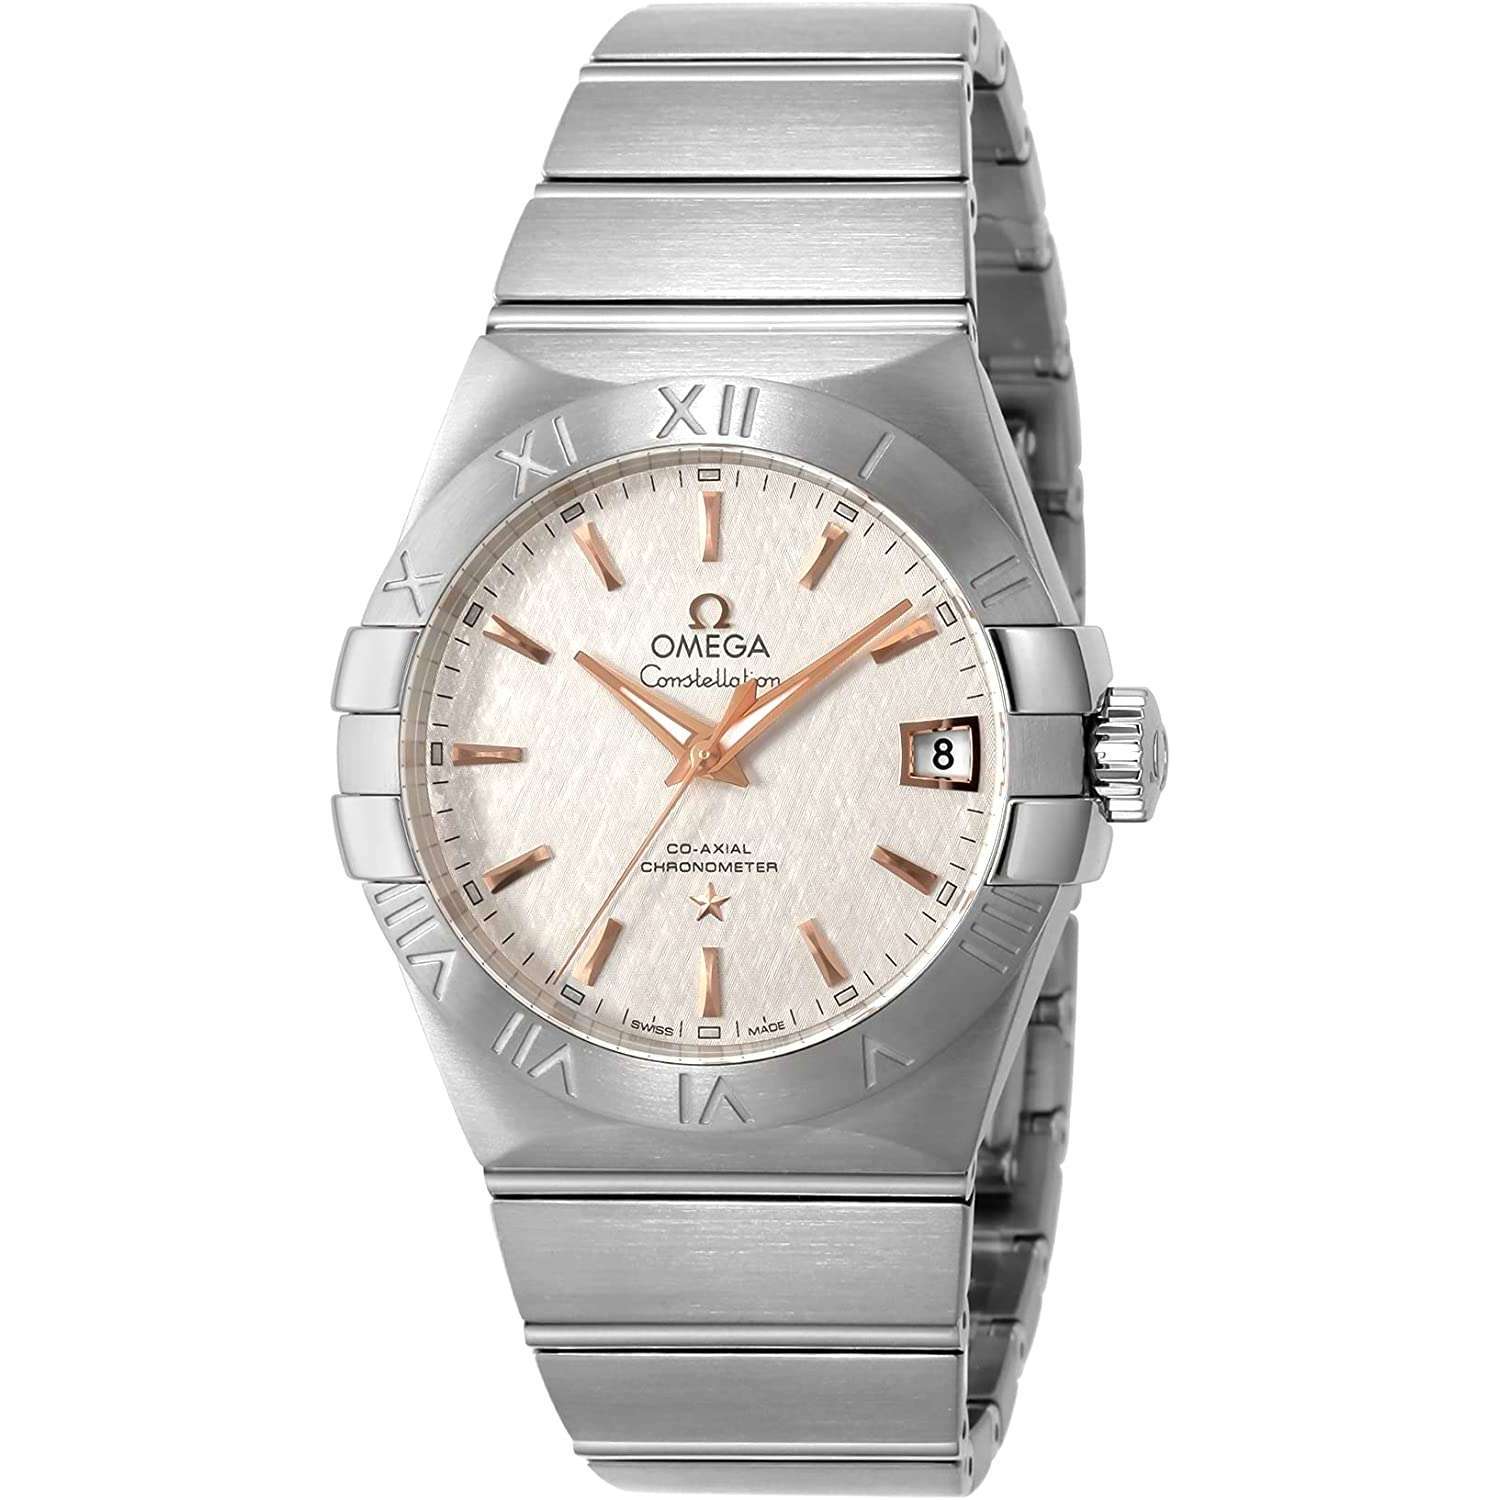 OMEGA CONSTELLATION CO-AXIAL CHRONOMETER 38 MM MEN WATCH 123.10.38.21.02.002 - ROOK JAPAN